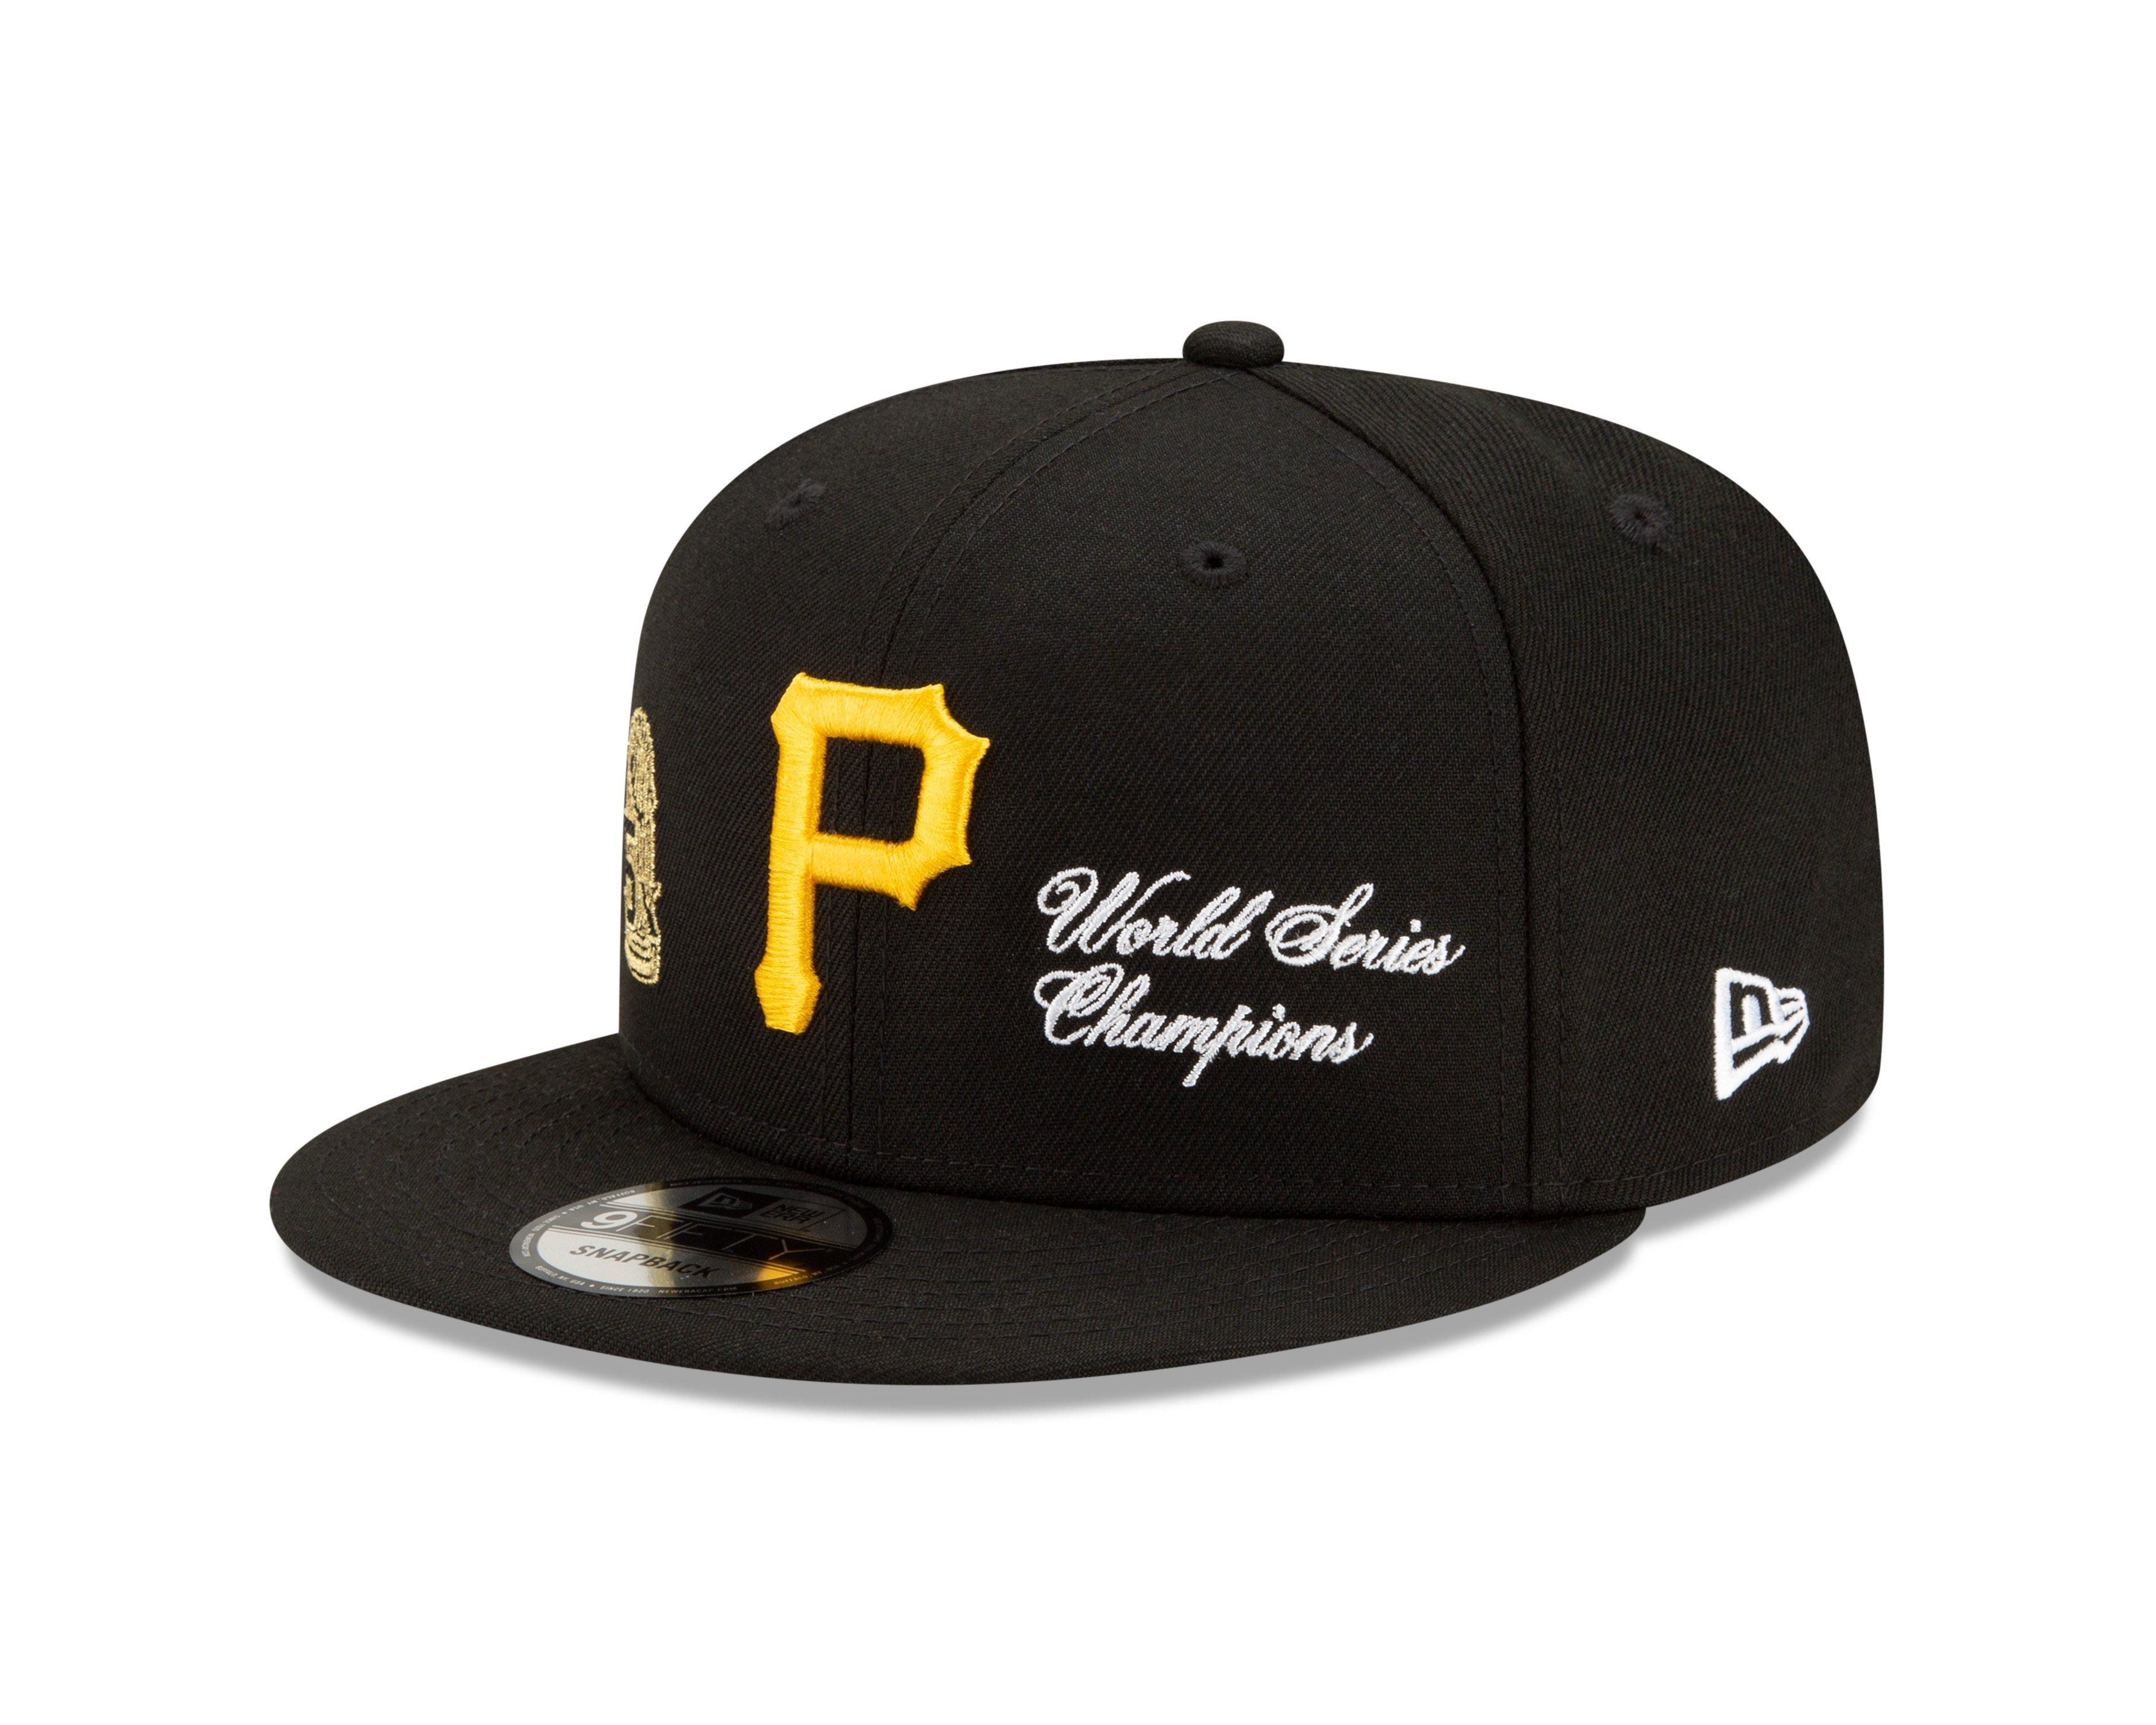 PITTSBURGH PIRATES NEW ERA 9FIFTY REAL TREE 3 DECADES SNAPBACK HAT –  Hangtime Indy